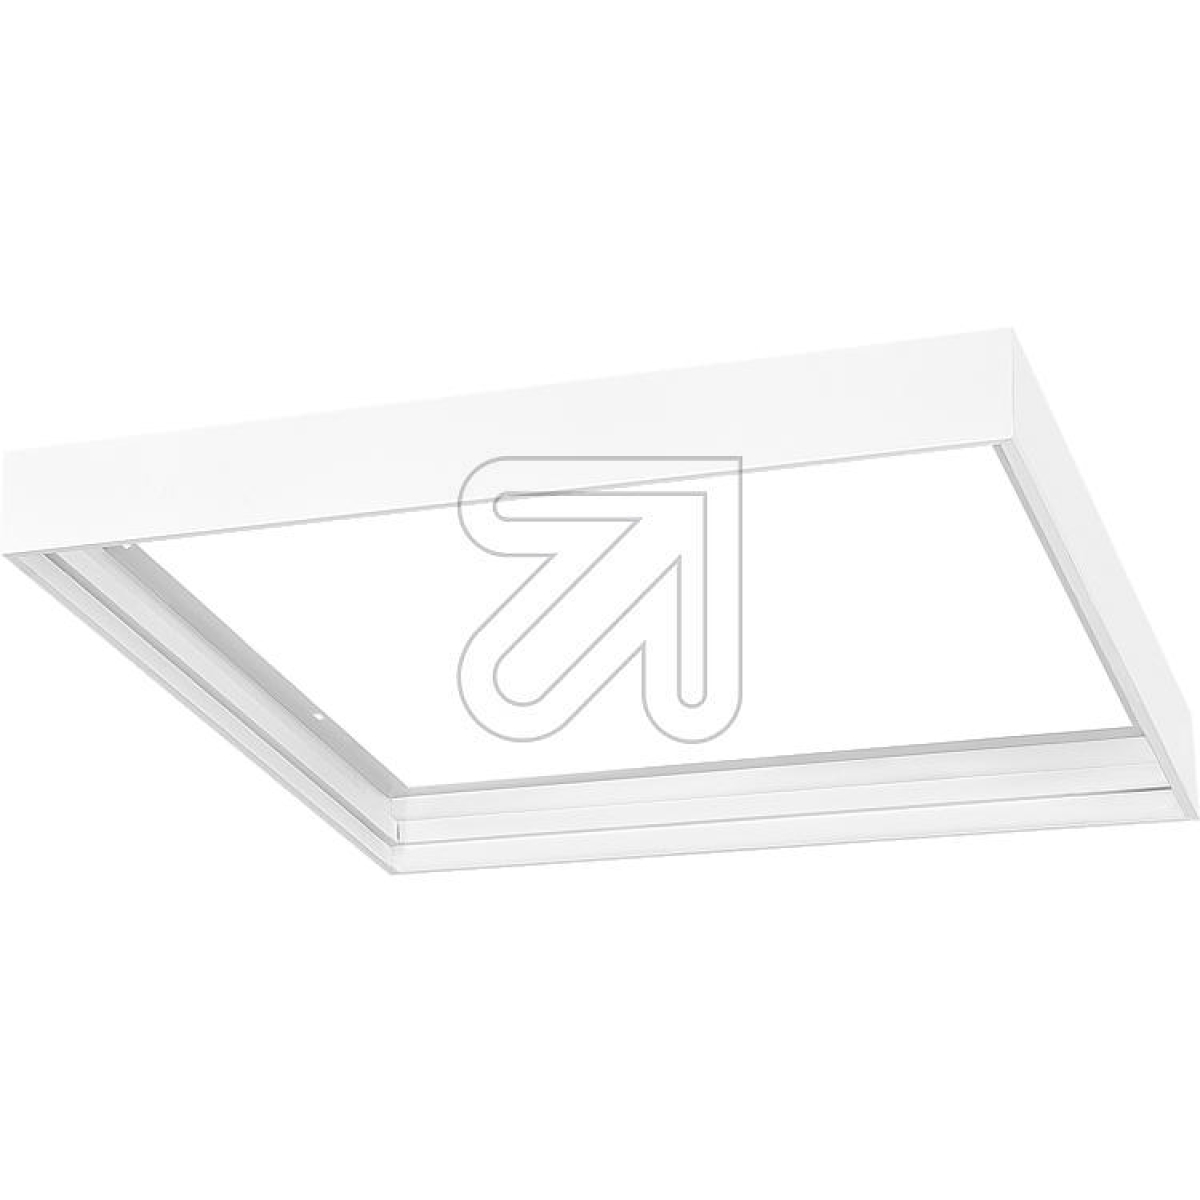 SLV GmbHAssembly frame for panels #595mm 1007474Article-No: 695680